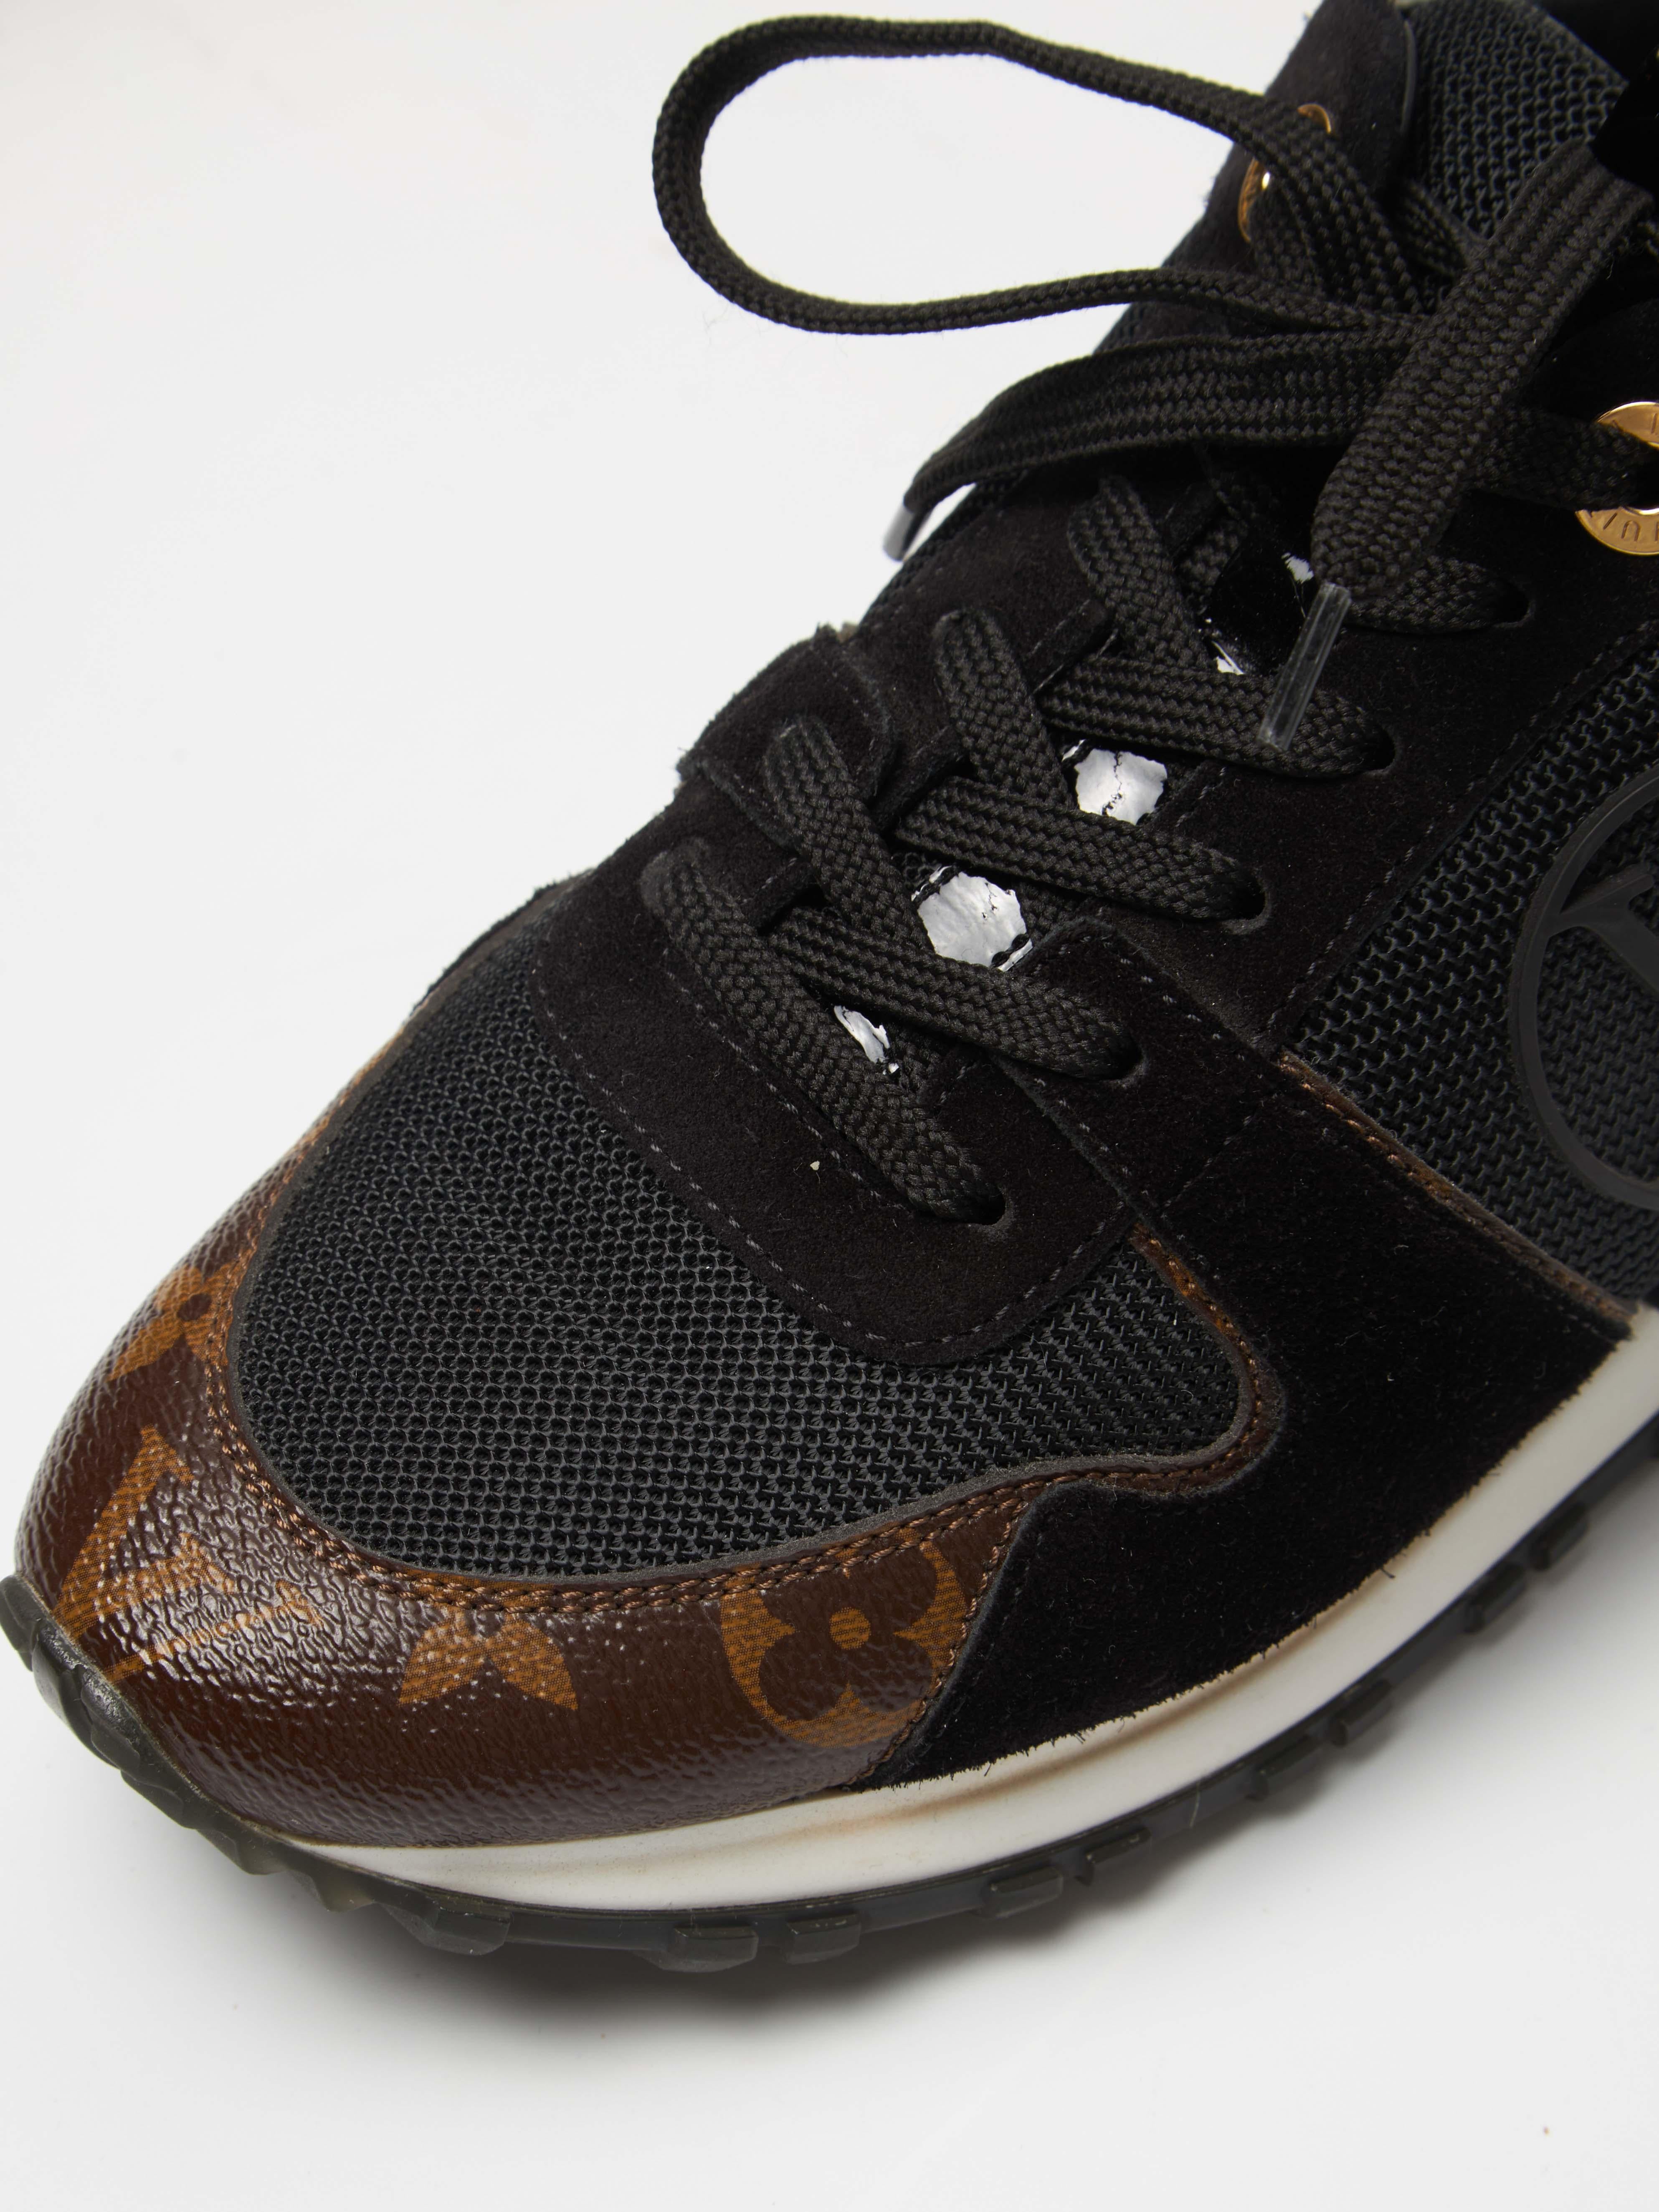 Louis Vuitton  Black Monogram Leather Sneakers  In New Condition For Sale In Dover, DE